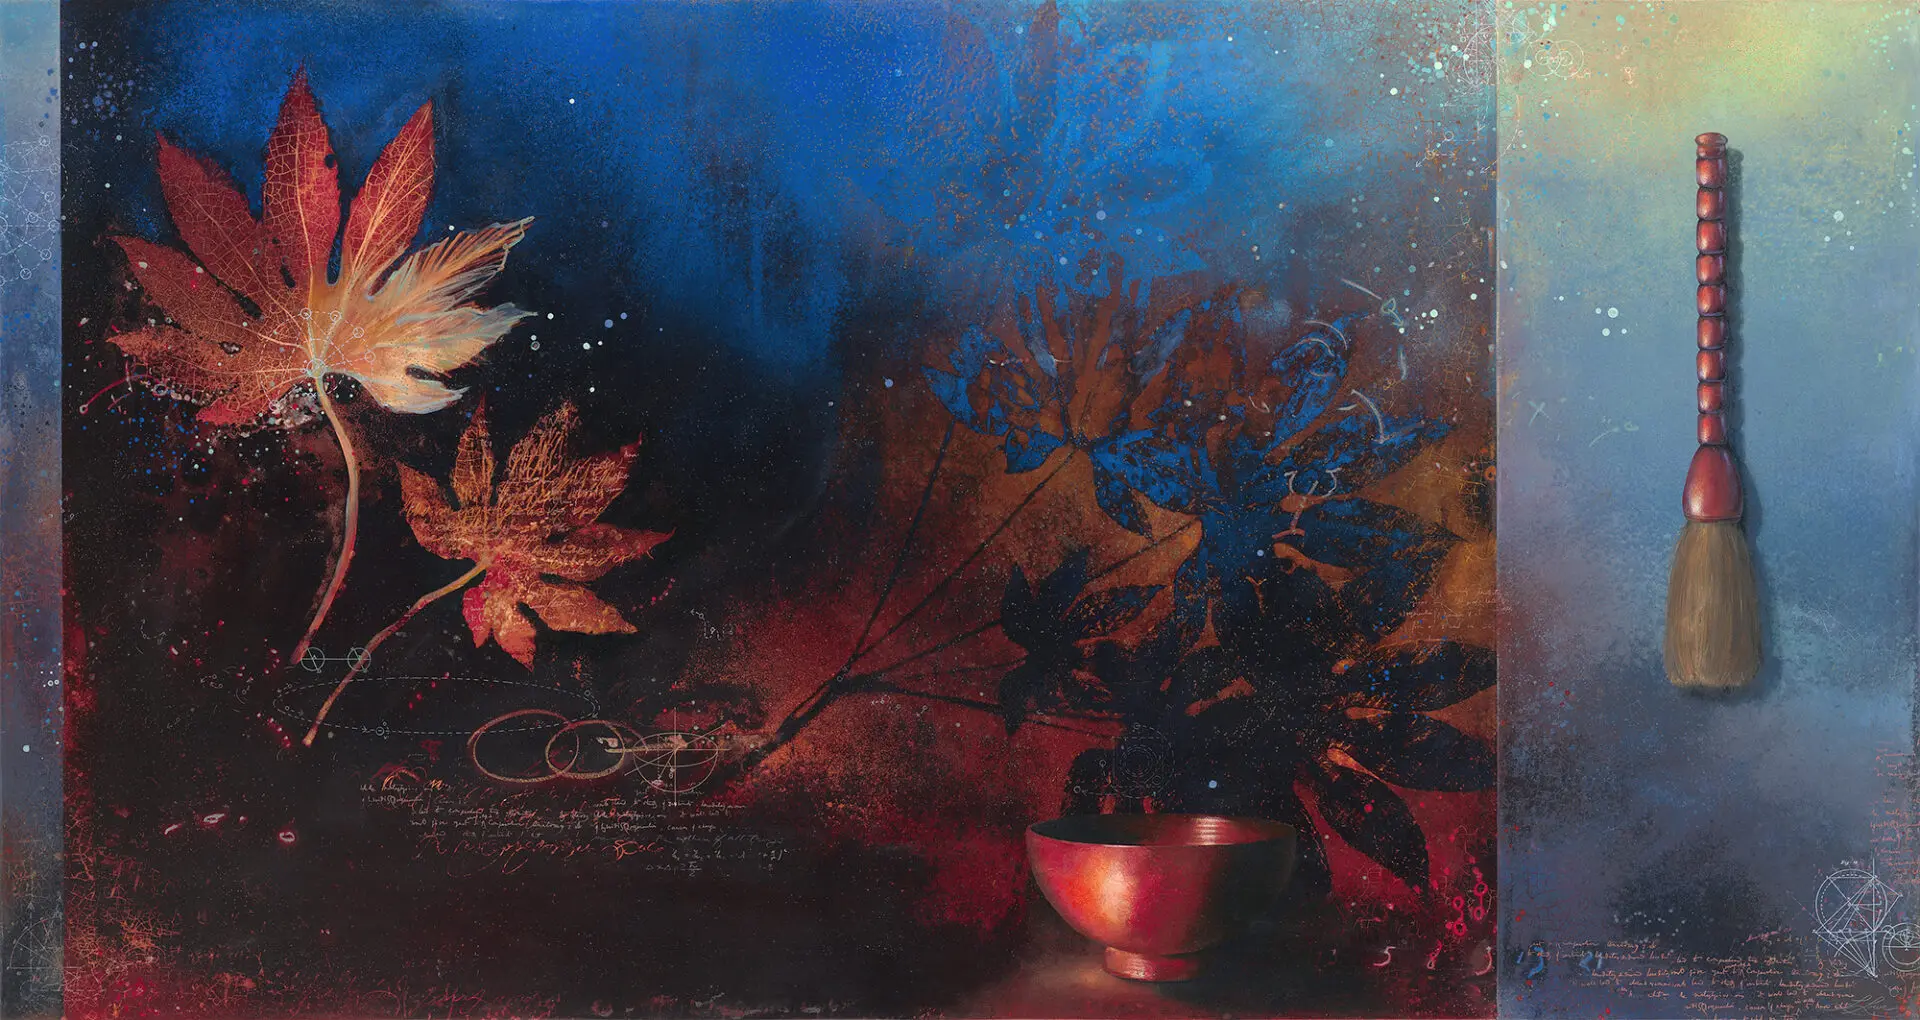 A painting of leaves and a bowl on the ground.